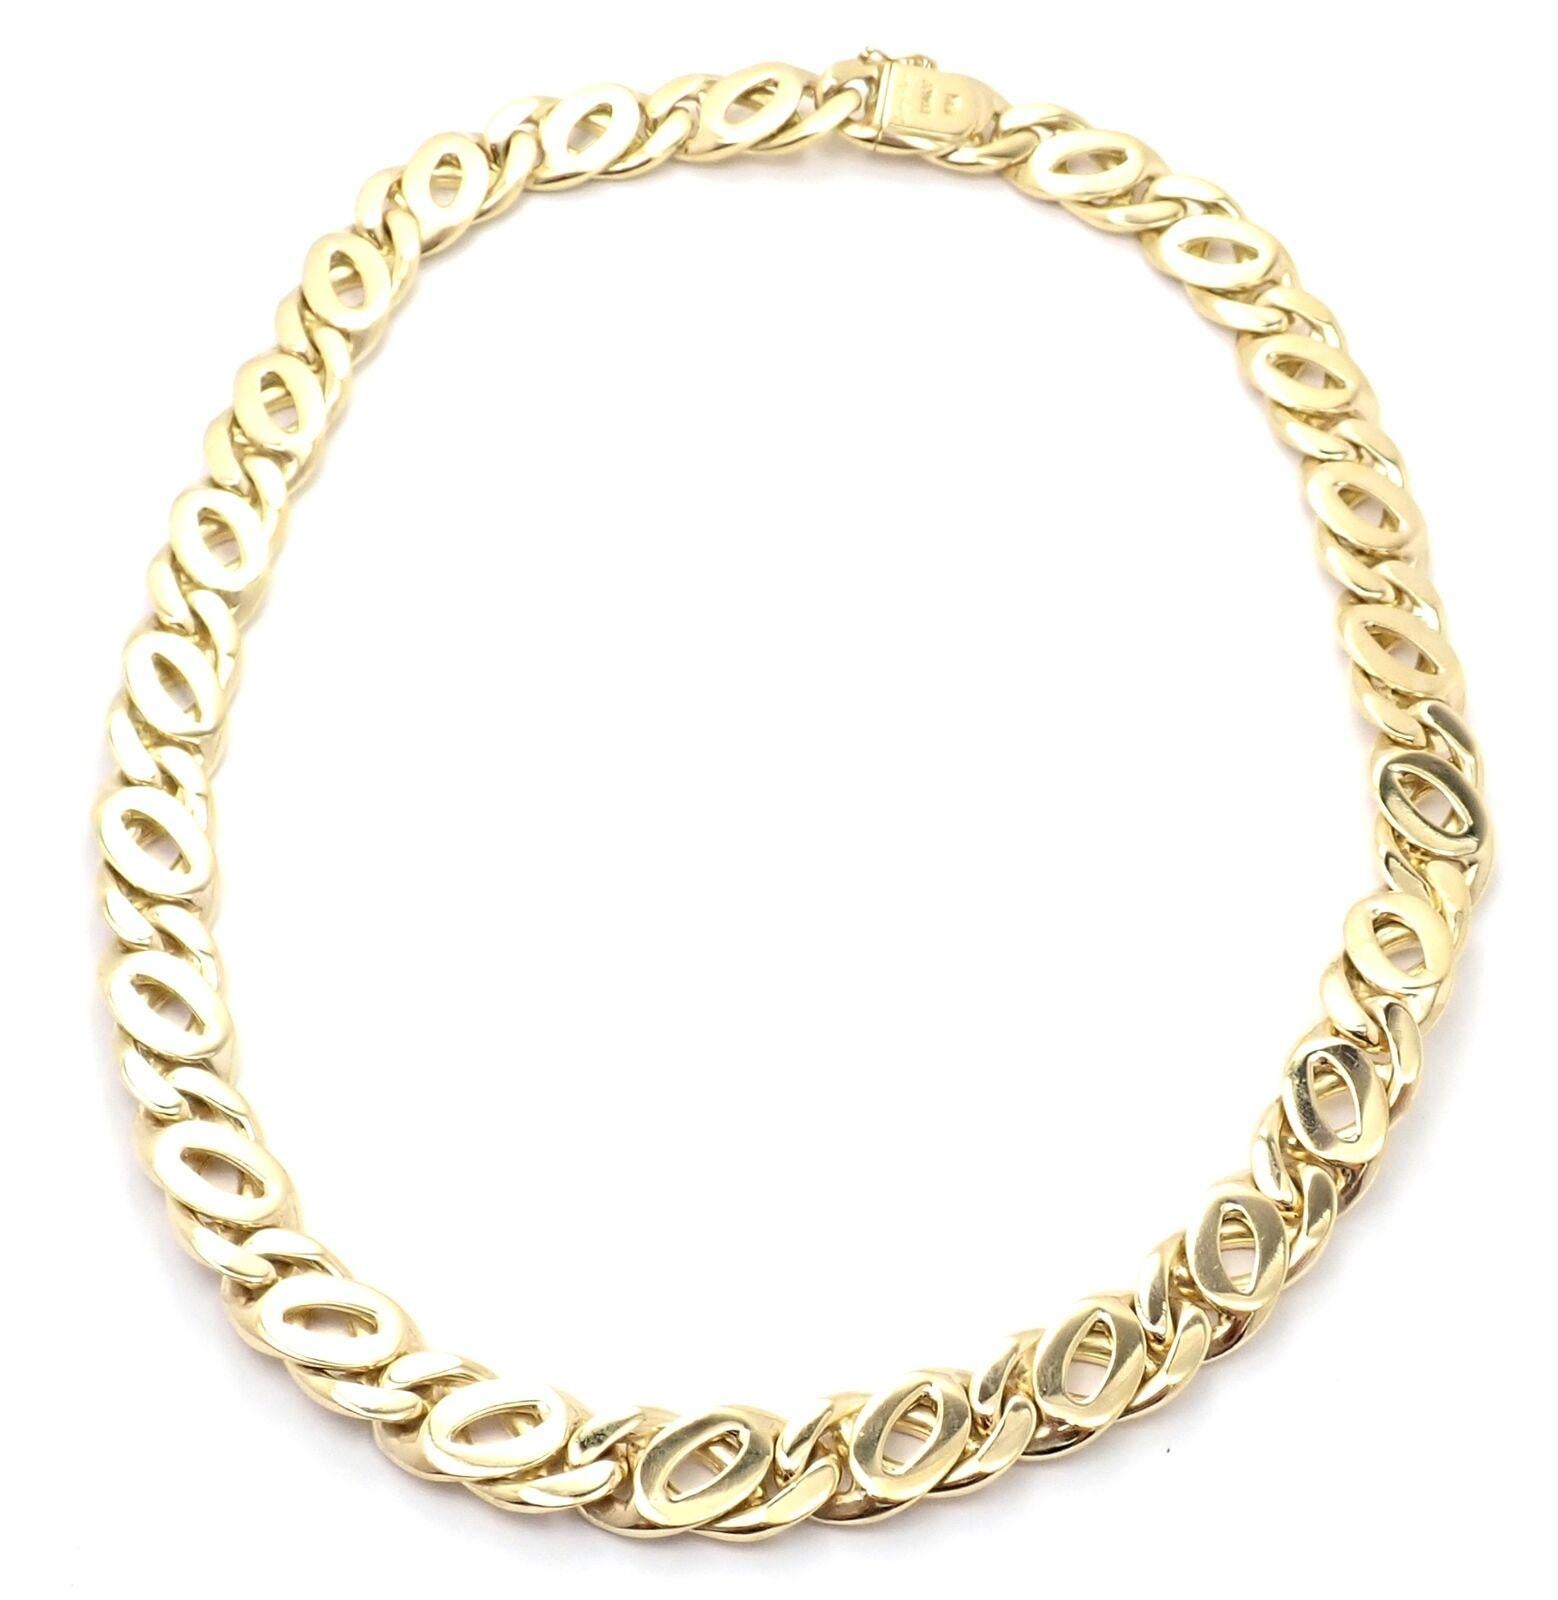 18K Yellow Gold Vintage Link Chain Necklace by Cartier.  
Necklace Details:  
Length: 15 3/4